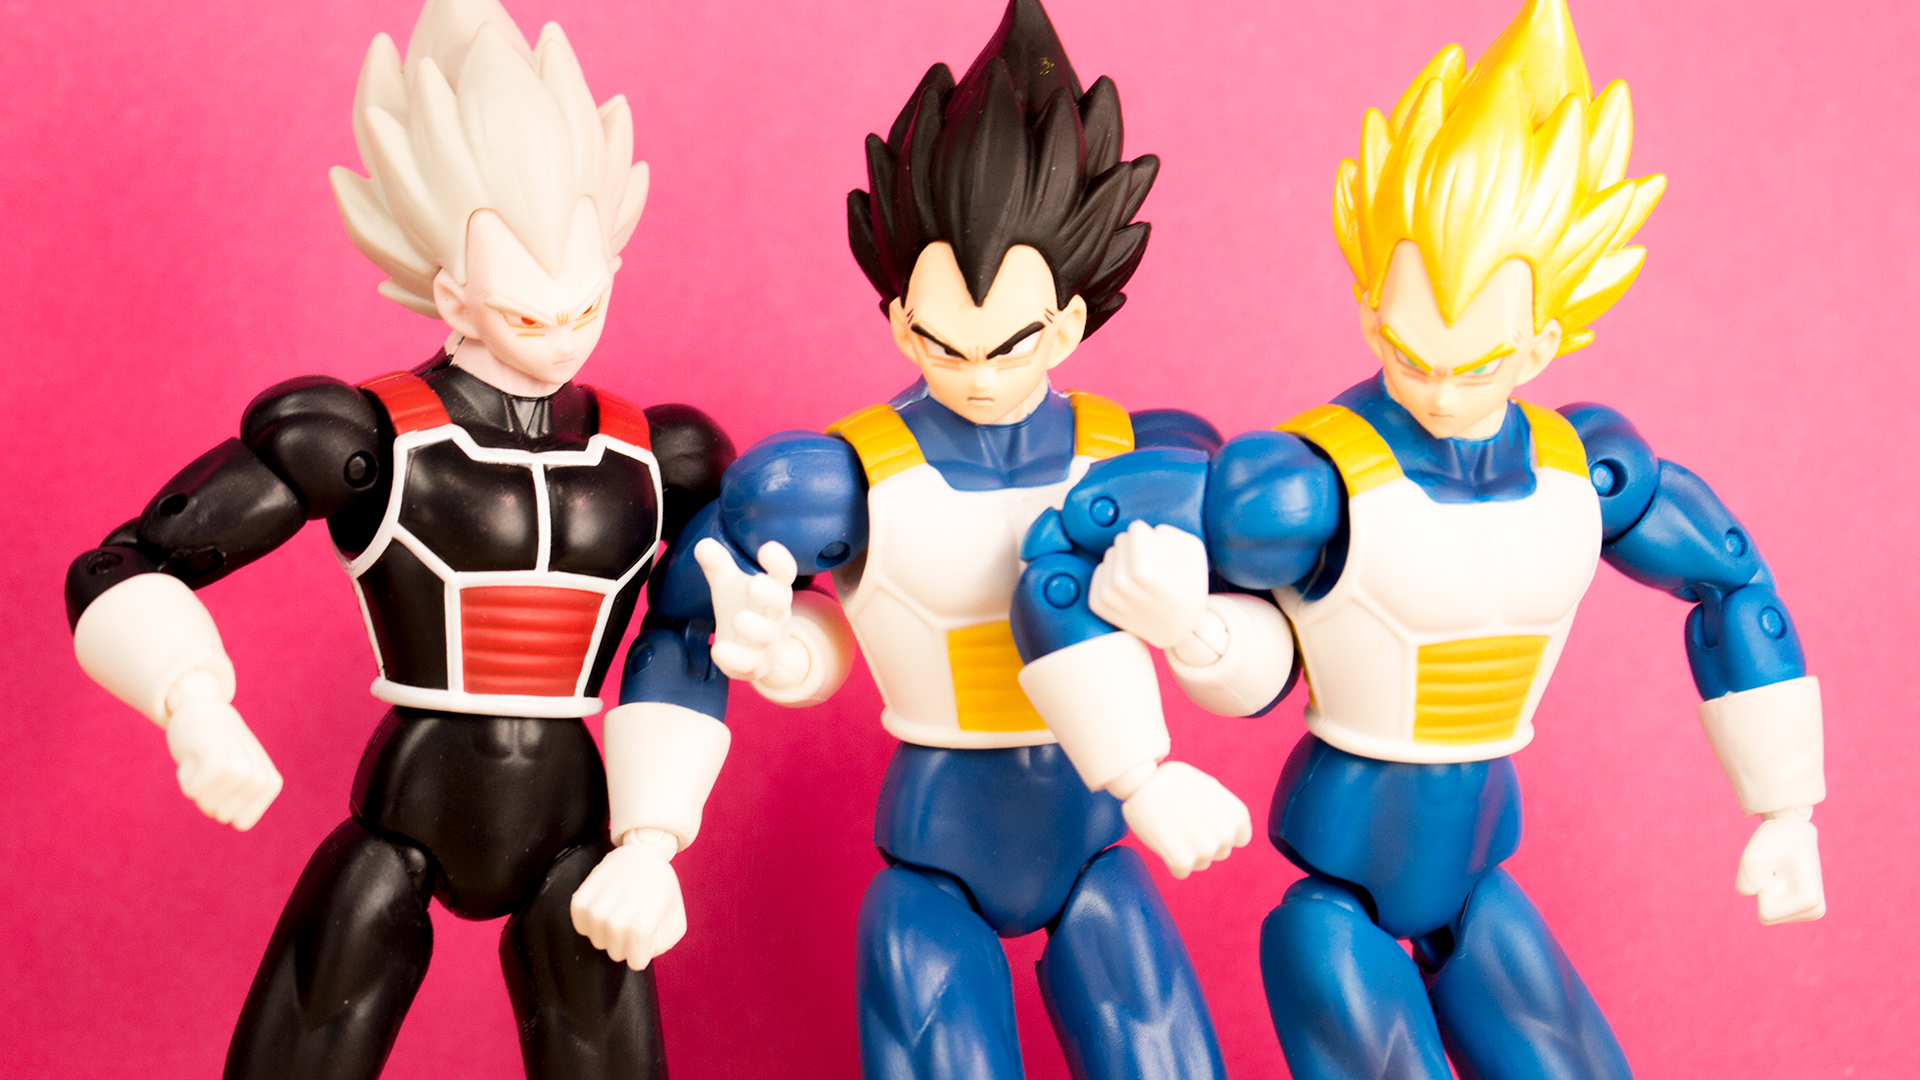 Dragon Ball Super Action Figures Play Well With Others